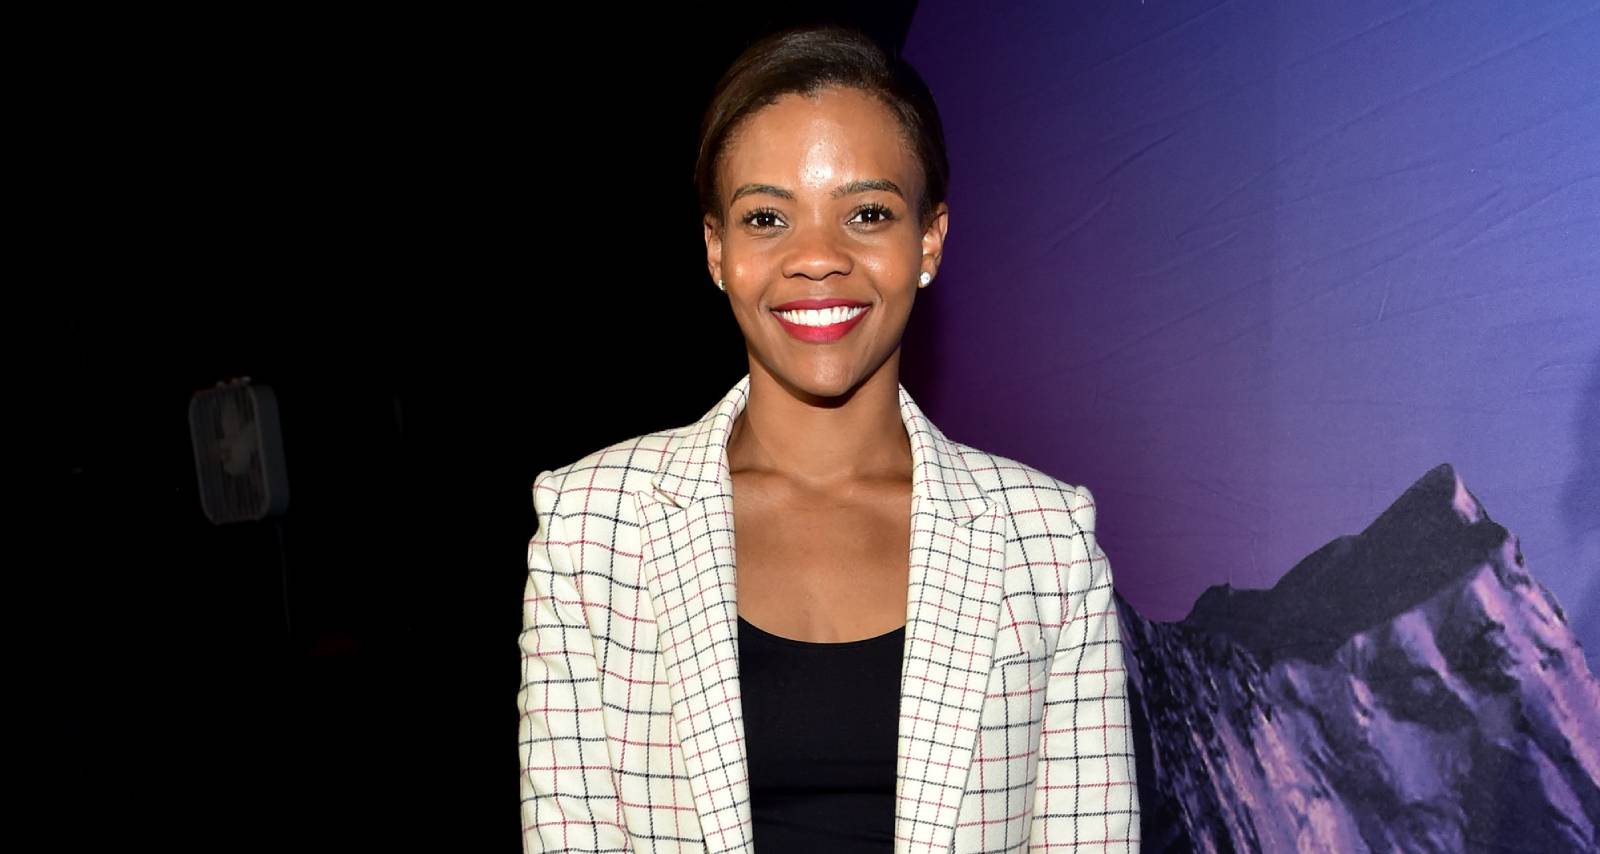 George Farmer Wiki, Age, Parents, Education and Facts About Political Commentator, Candace Owens’ Husband